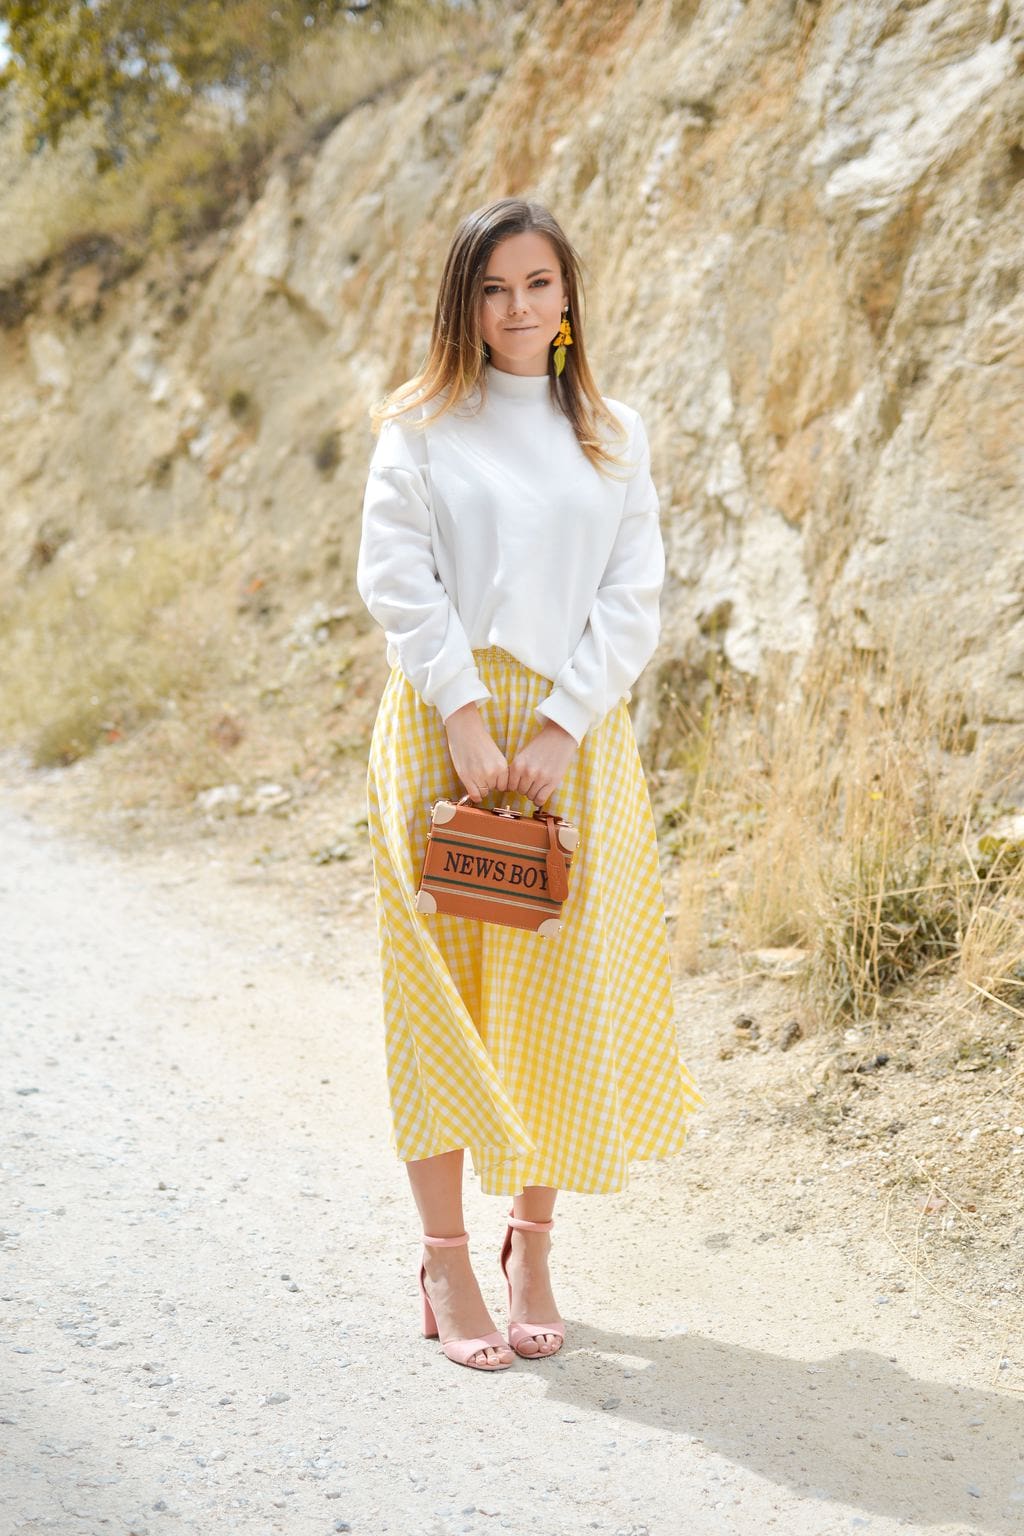 Photo of woman standing against rocky background wearing yellow dangling earrings, white turtleneck top, yellow and white gingham skirt, and pale pink heeled sandals, holding a cognac brown box bag that says 